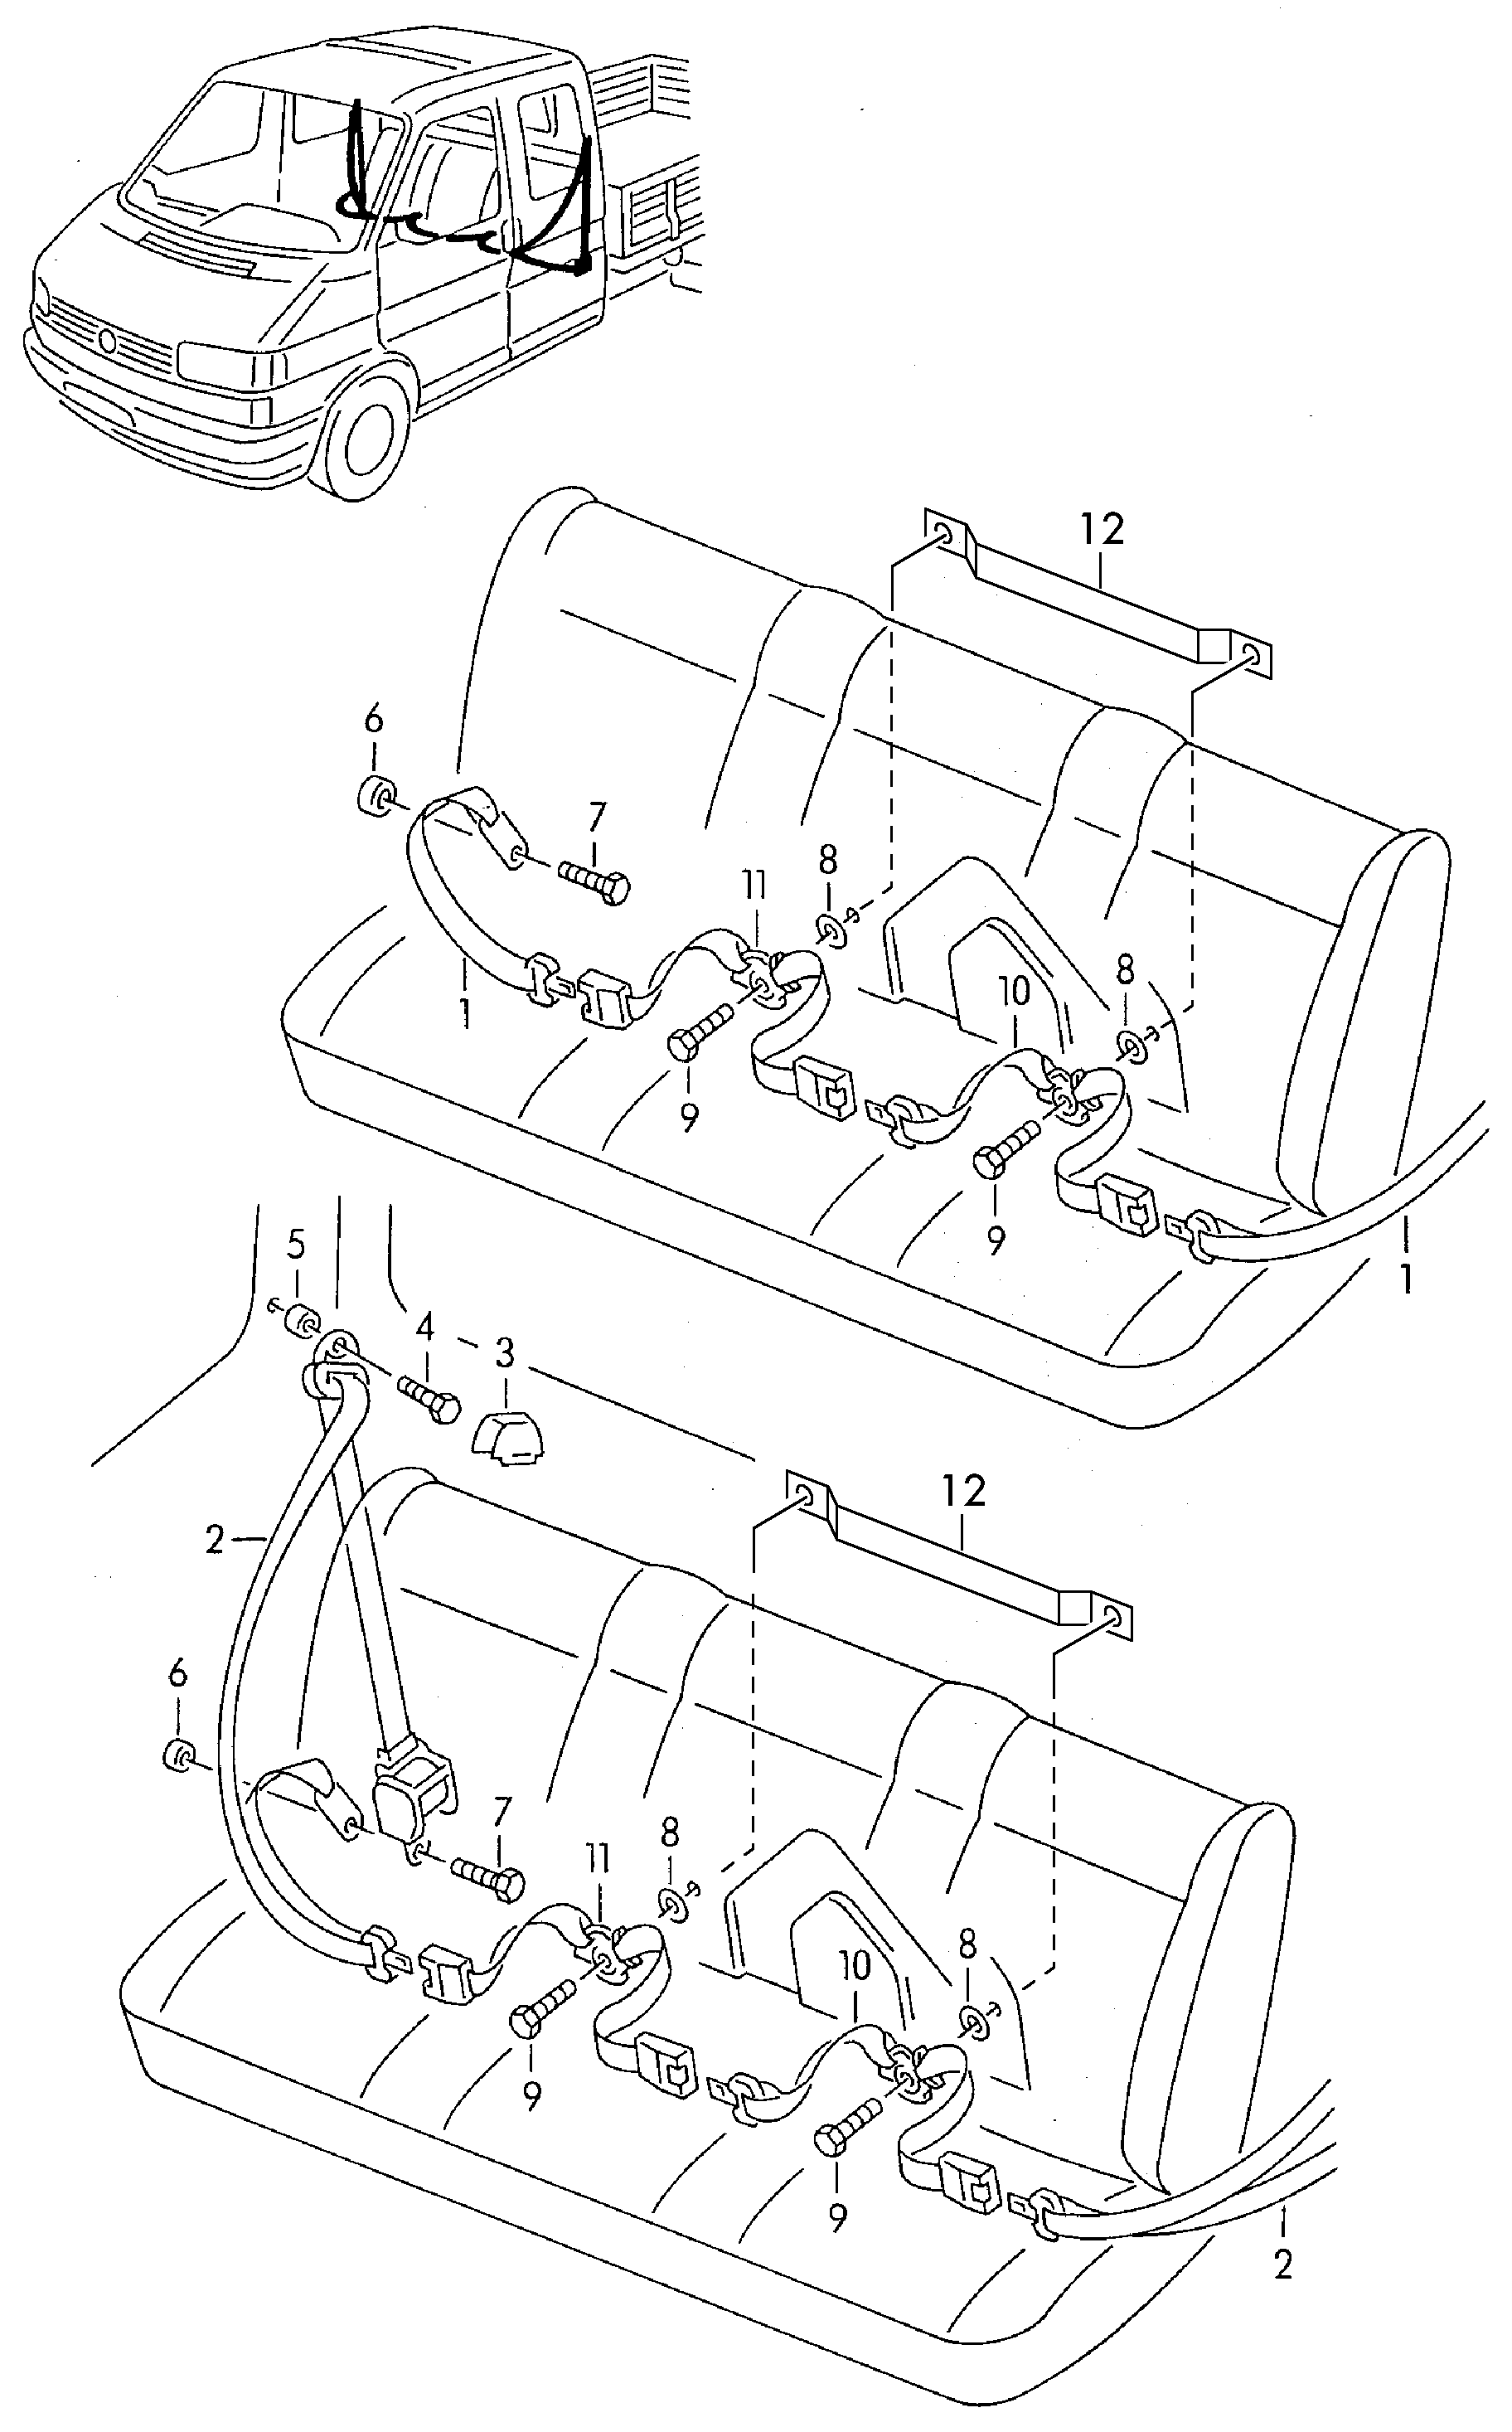 seat belts in
passenger compartment - Transporter(TR)  